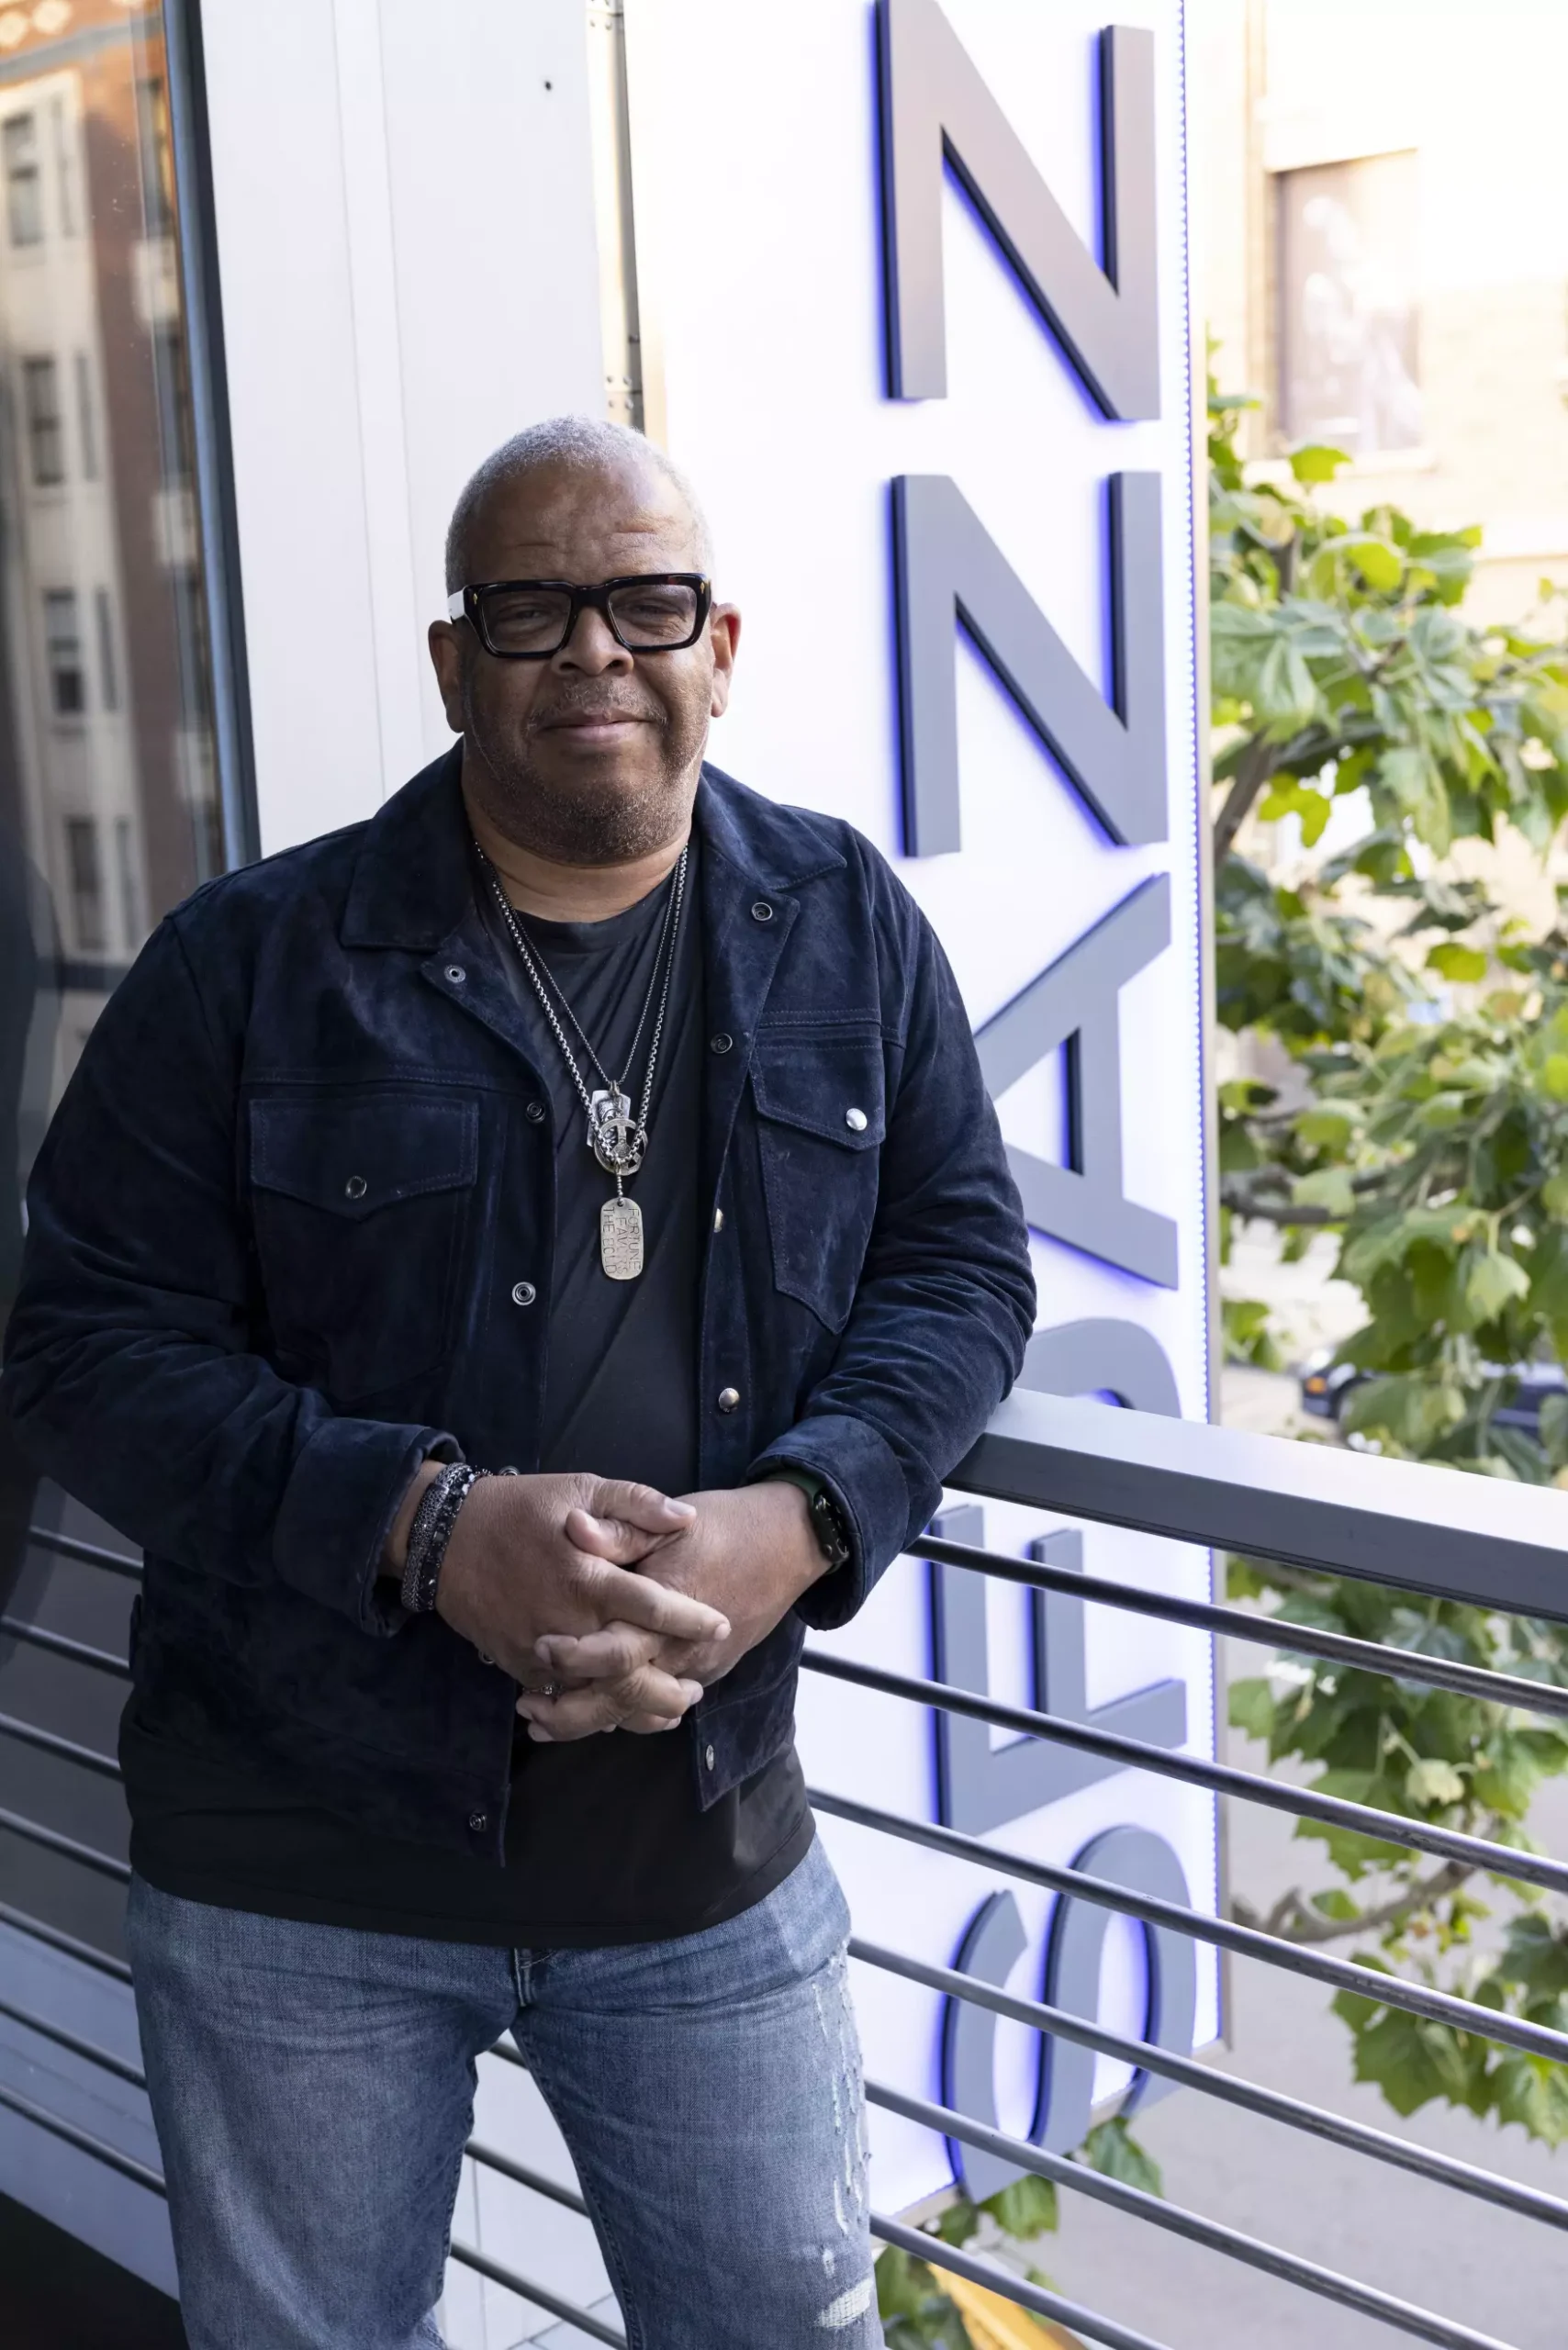 Terence Blanchard, the new Executive Artistic Director of SFJAZZ, at the SFJAZZ Center in San Francisco.